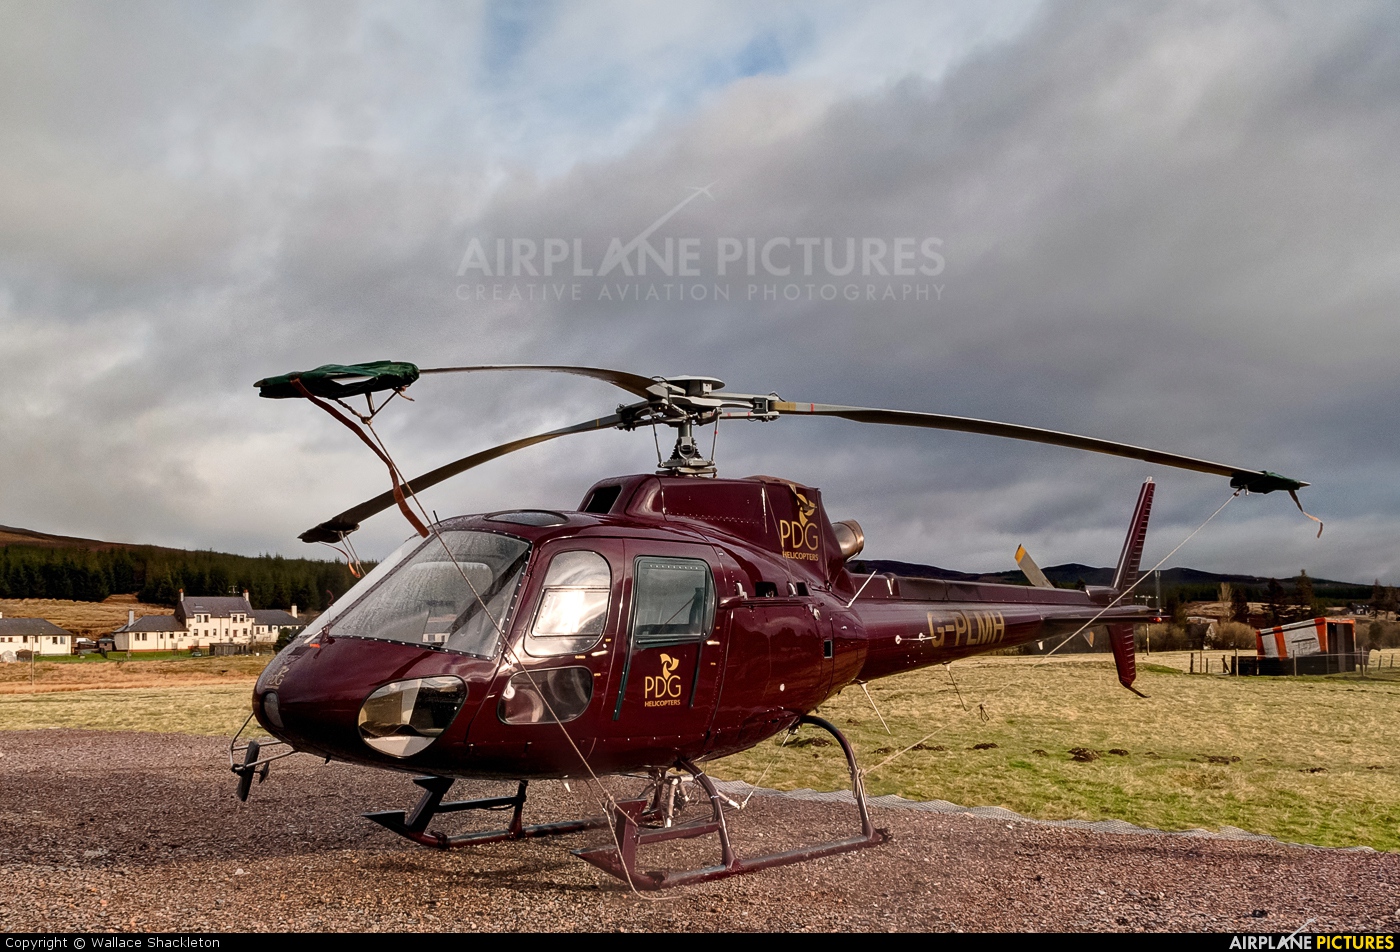 PLM Dollar Group / PDG Helicopters G-PLMH aircraft at Off Airport - Scotland